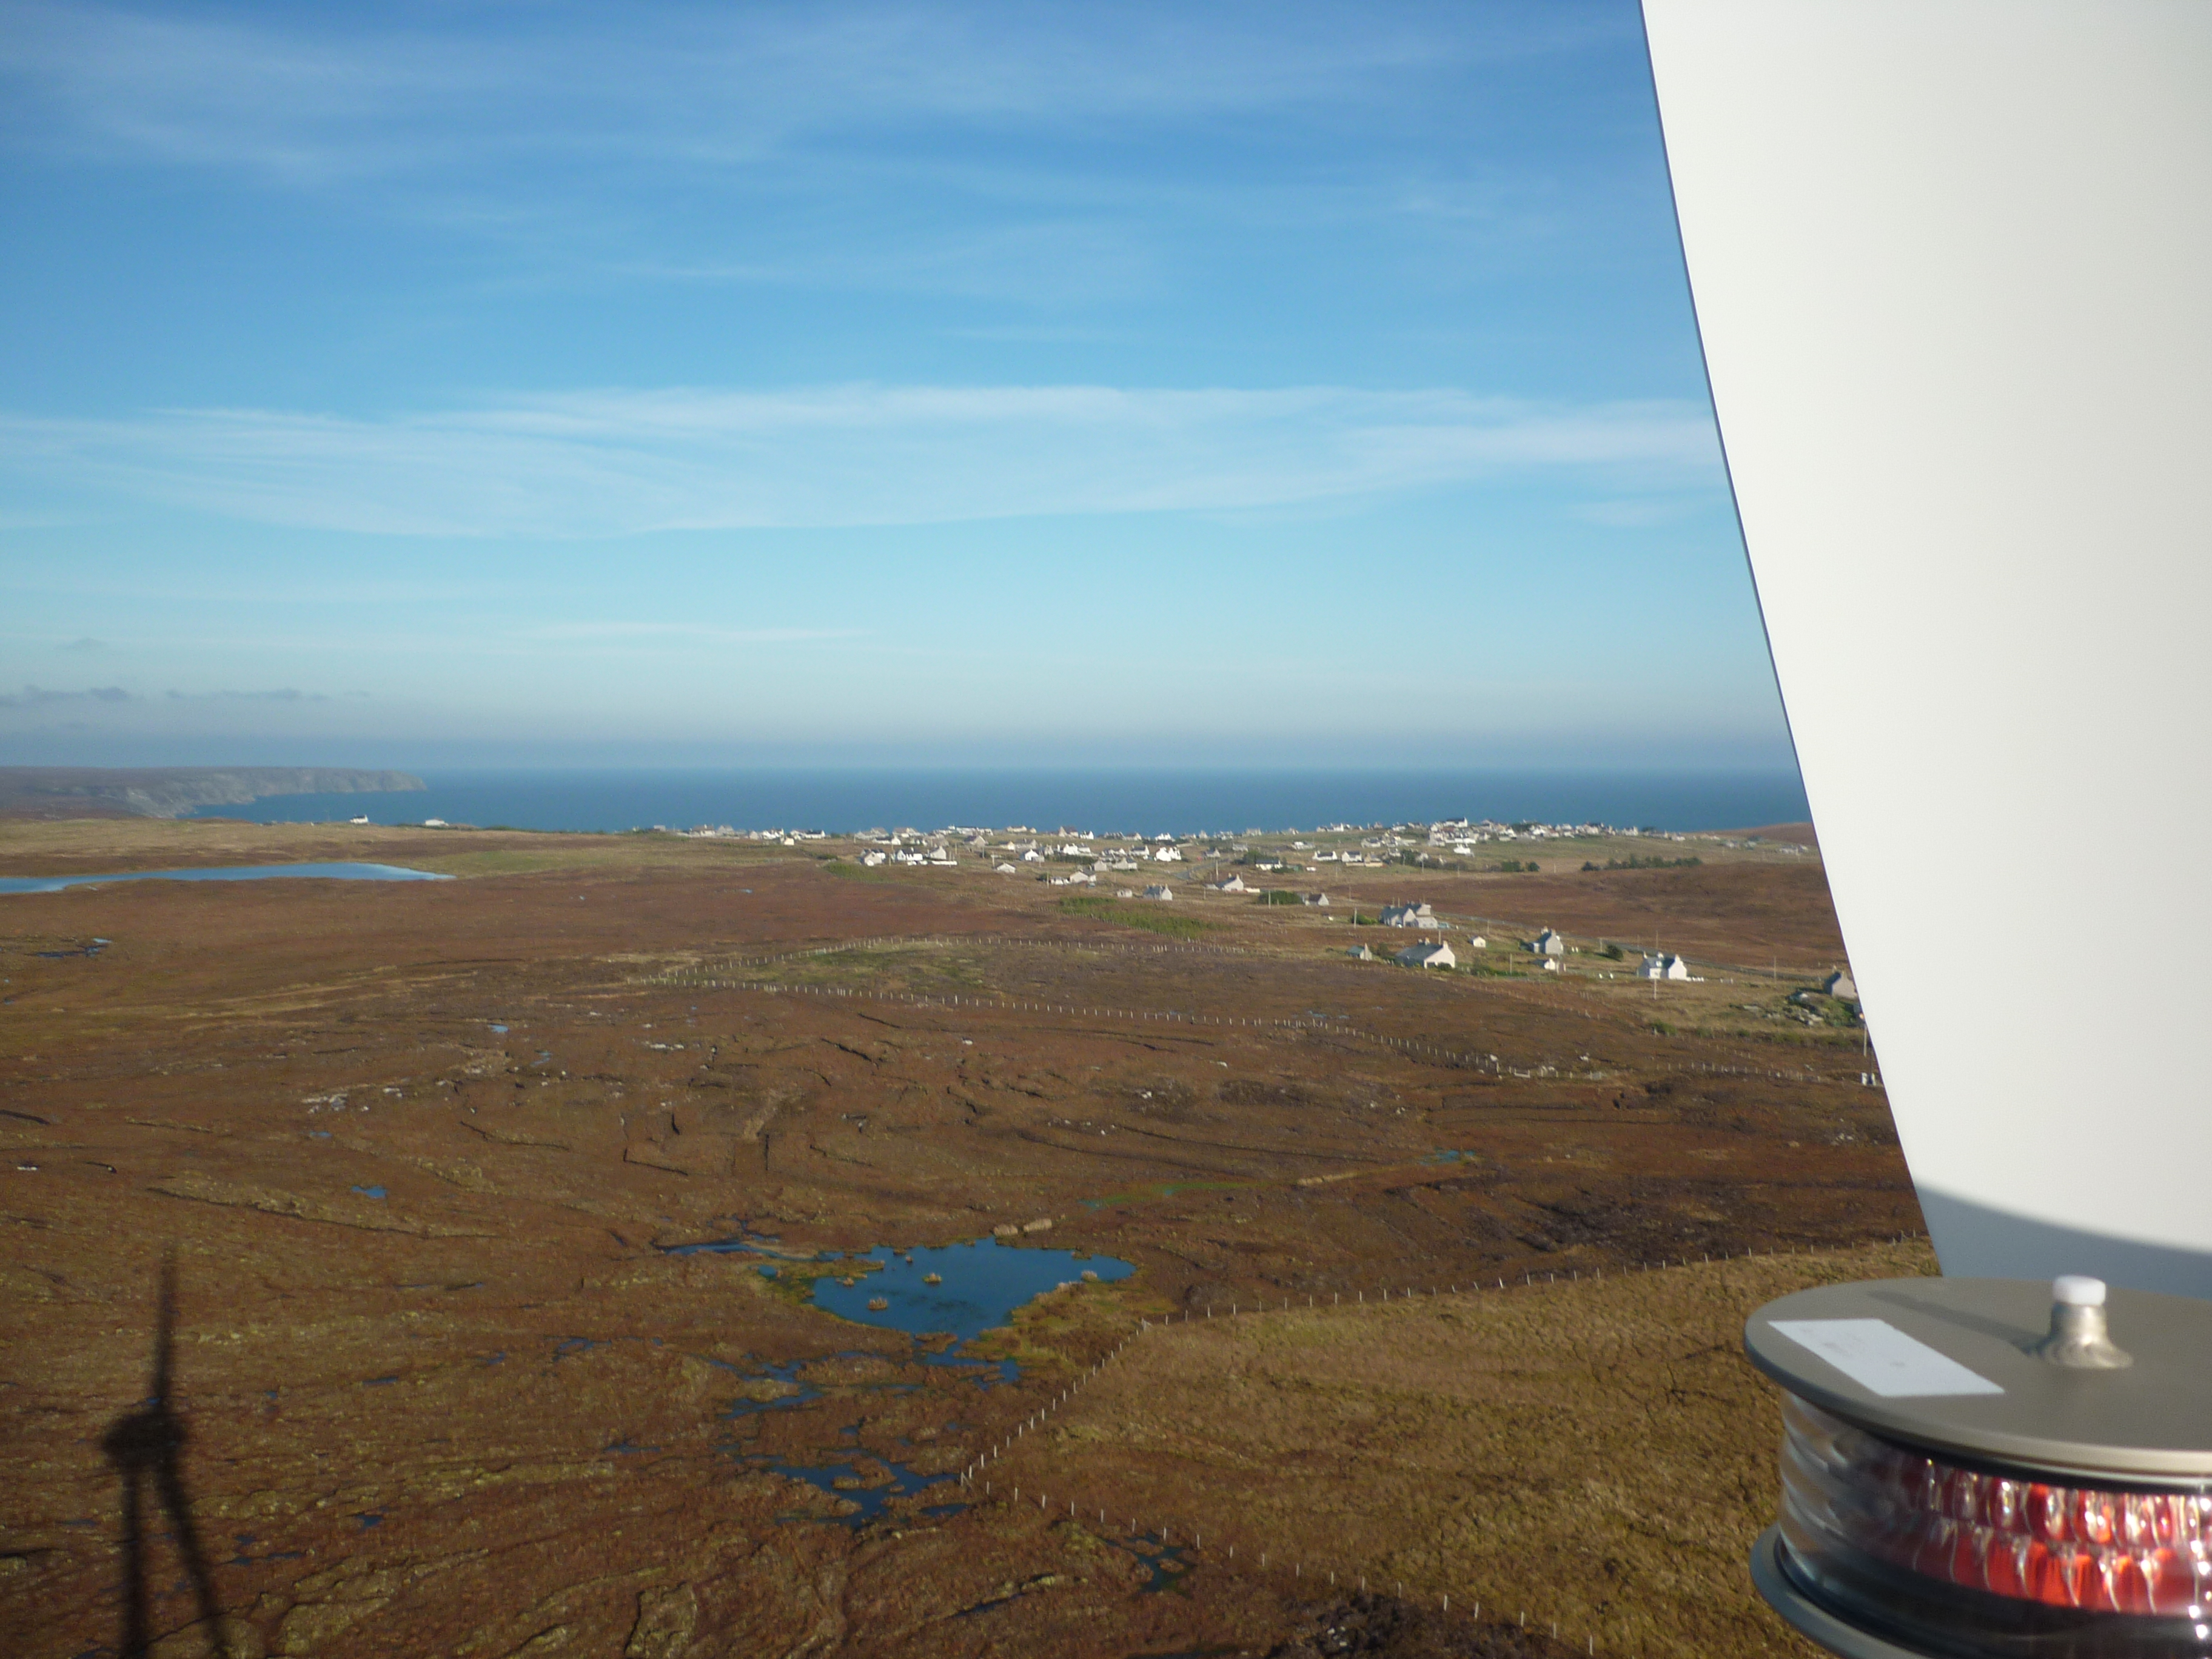 The view of the village of Tolsta from the Tolsta Community Development Ltd (TCDL) owned wind turbine